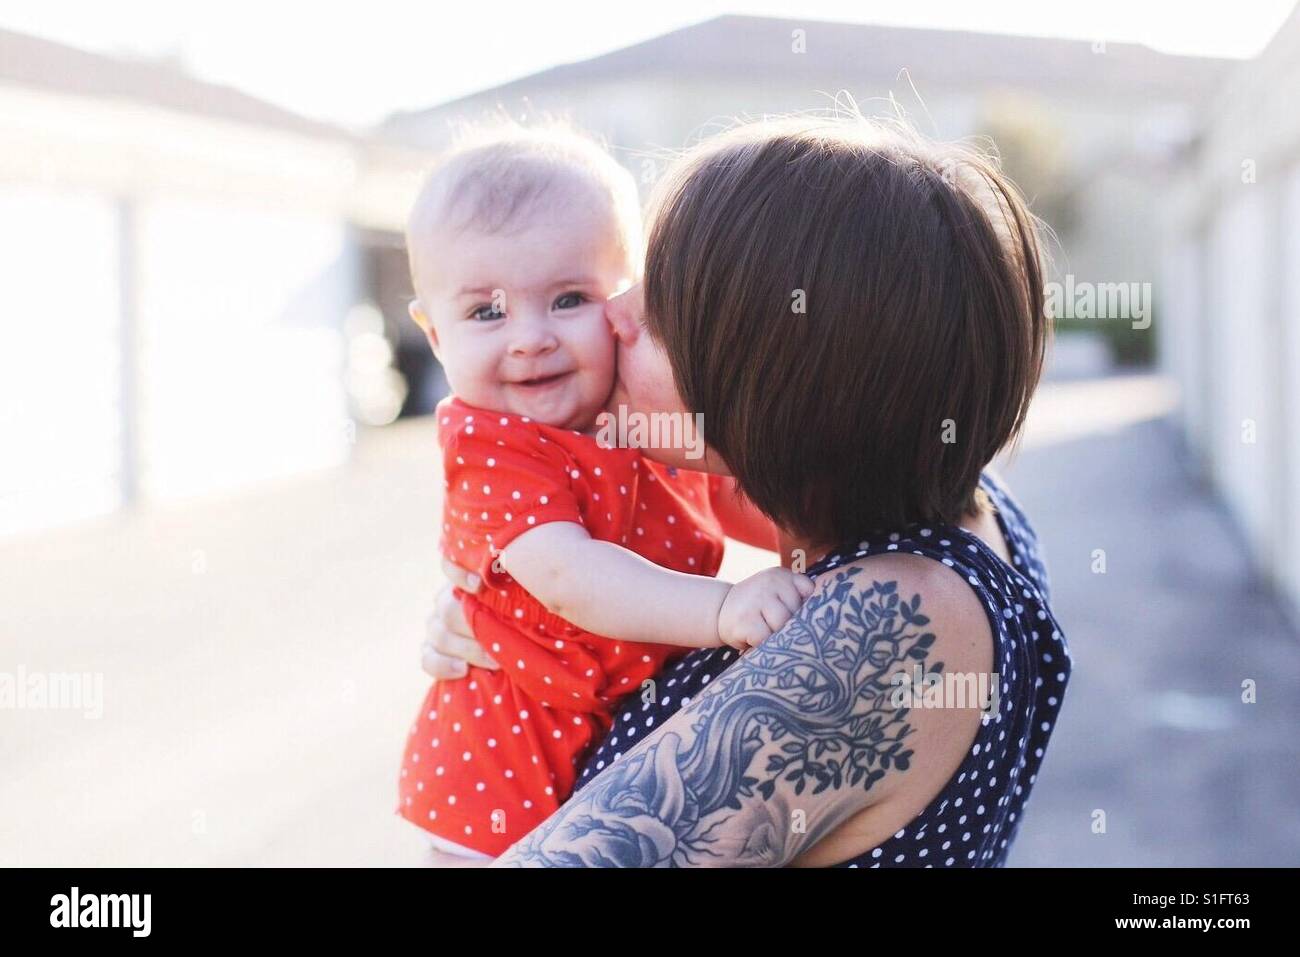 Hip young mom with short hair and tattoos holding baby girl daughter kissing on cheek Stock Photo